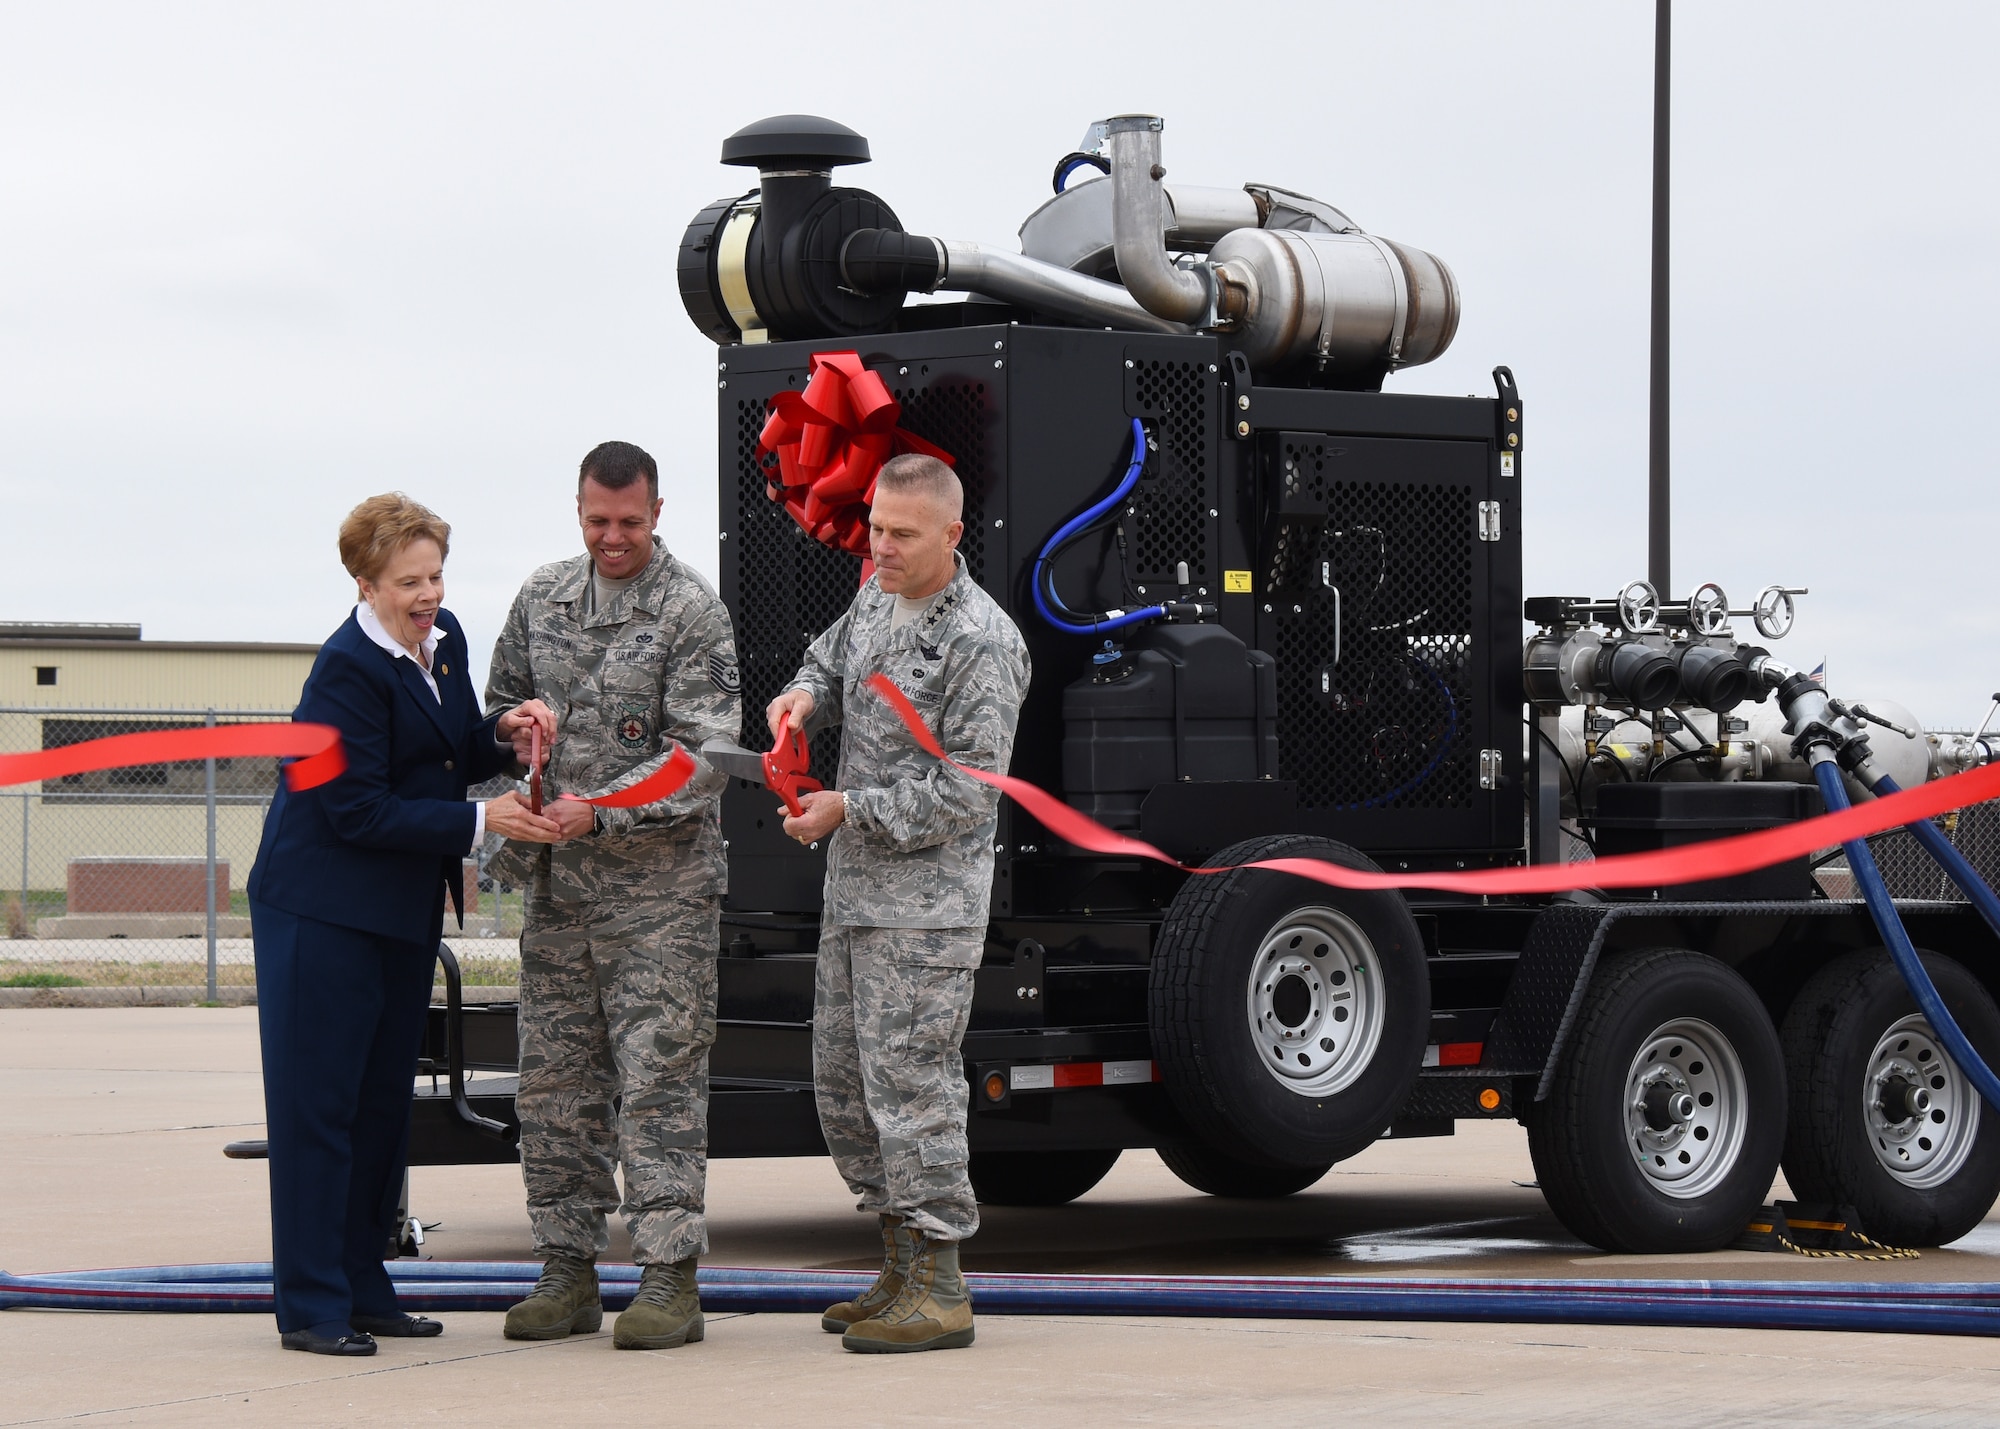 Dr. Carol Bonds, U.S. Air Force Tech. Sgt. Jayton Washington, 312th Training Squadron instructor, and Lt. Gen. Steve Kwast, commander of Air Education and Training Command, cut the ribbon for a new mobile fire pump at the Louis F. Garland Department of Defense Fire Academy on Goodfellow Air Force Base, Texas, March 20, 2019. Thanks to help from Bonds family and the city of San Angelo, Goodfellow was able to purchase four new pumps. (U.S. Air Force photo by Airman 1st Class Zachary Chapman/Released)